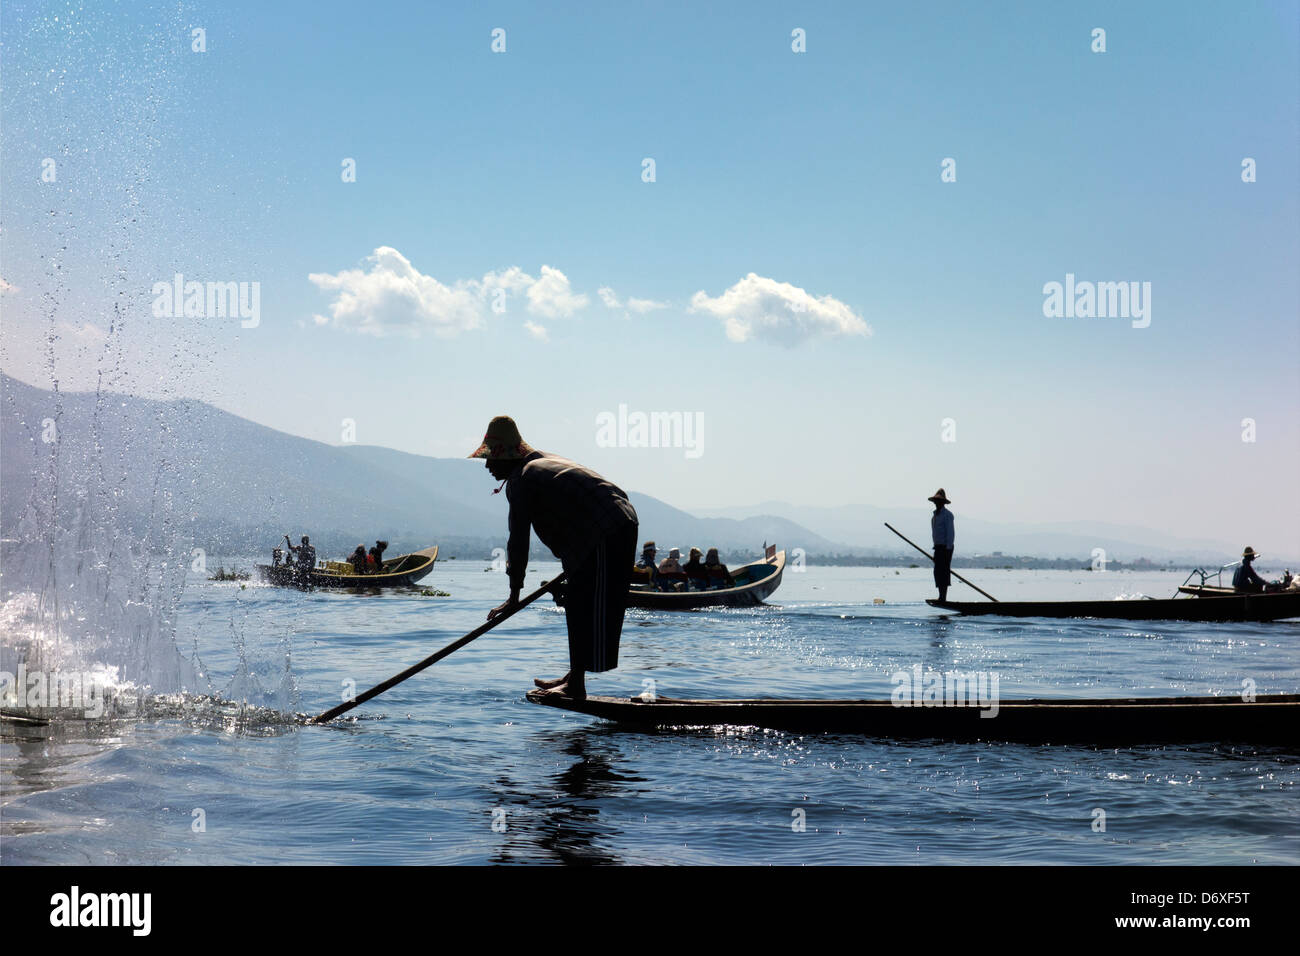 Fisherman beating the water to attract fish on Lake Inle, Myanmar 8 Stock Photo